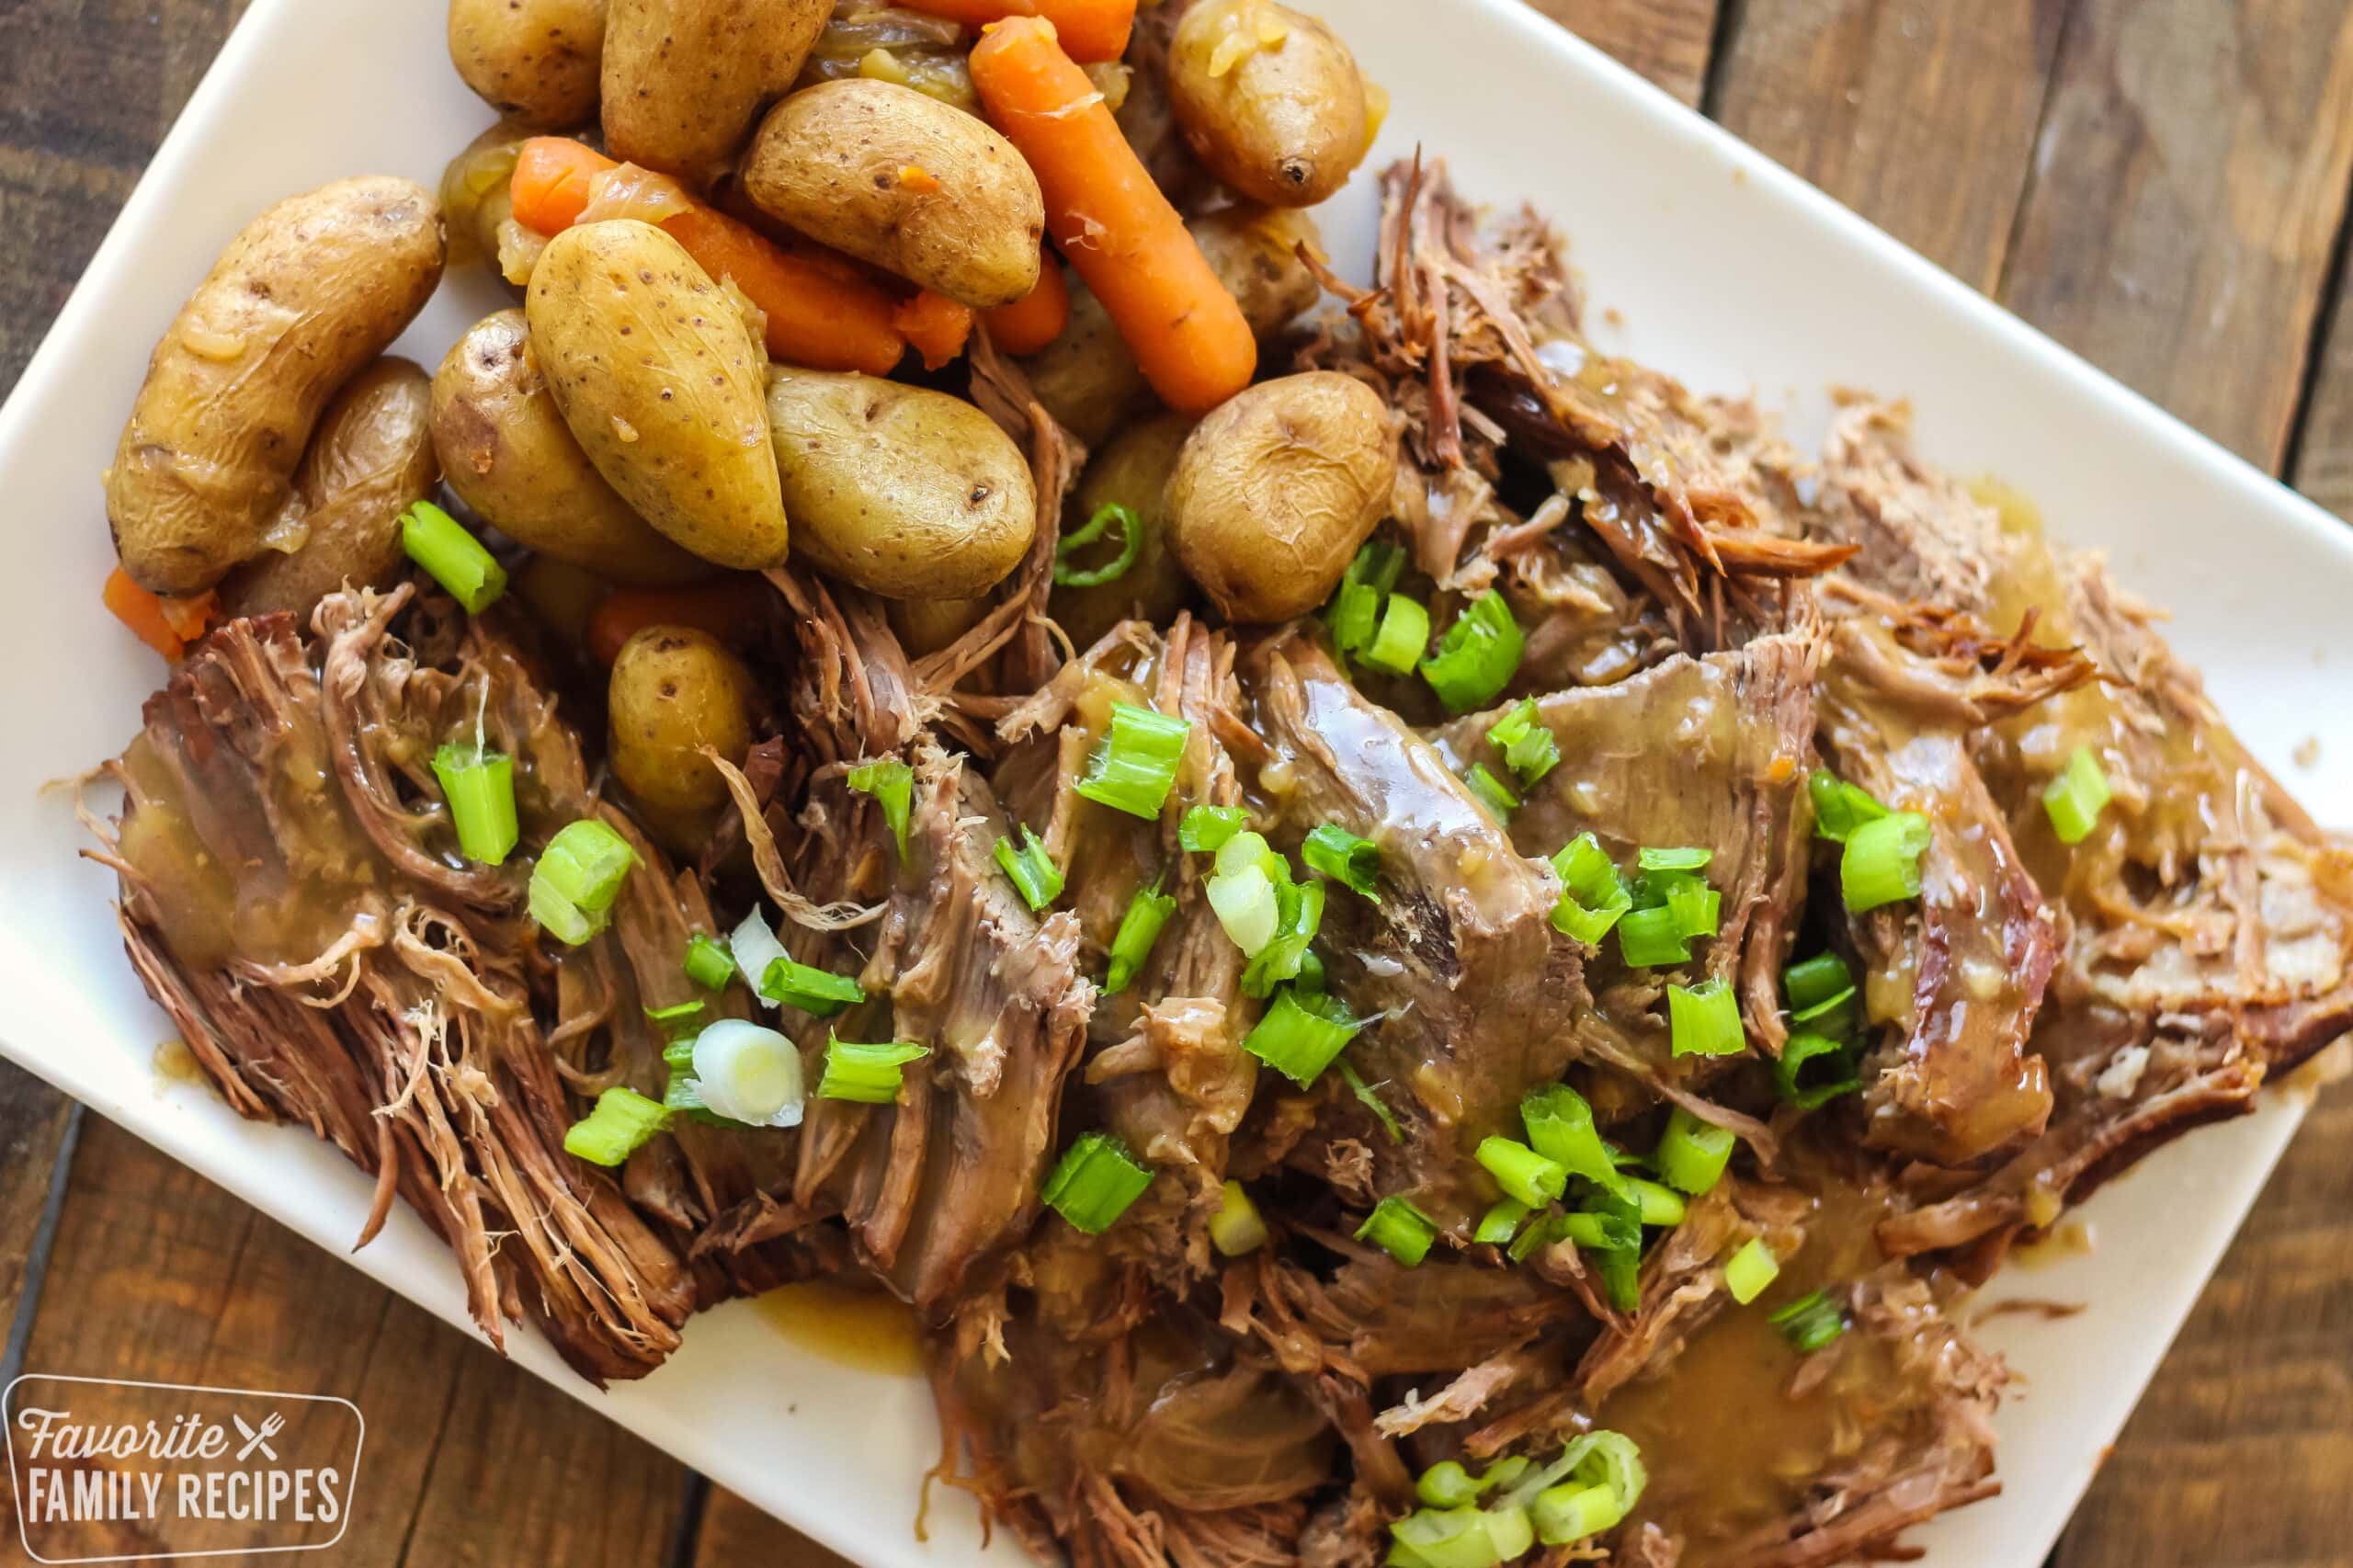 Cooking Roast Beef? Questions Answered.